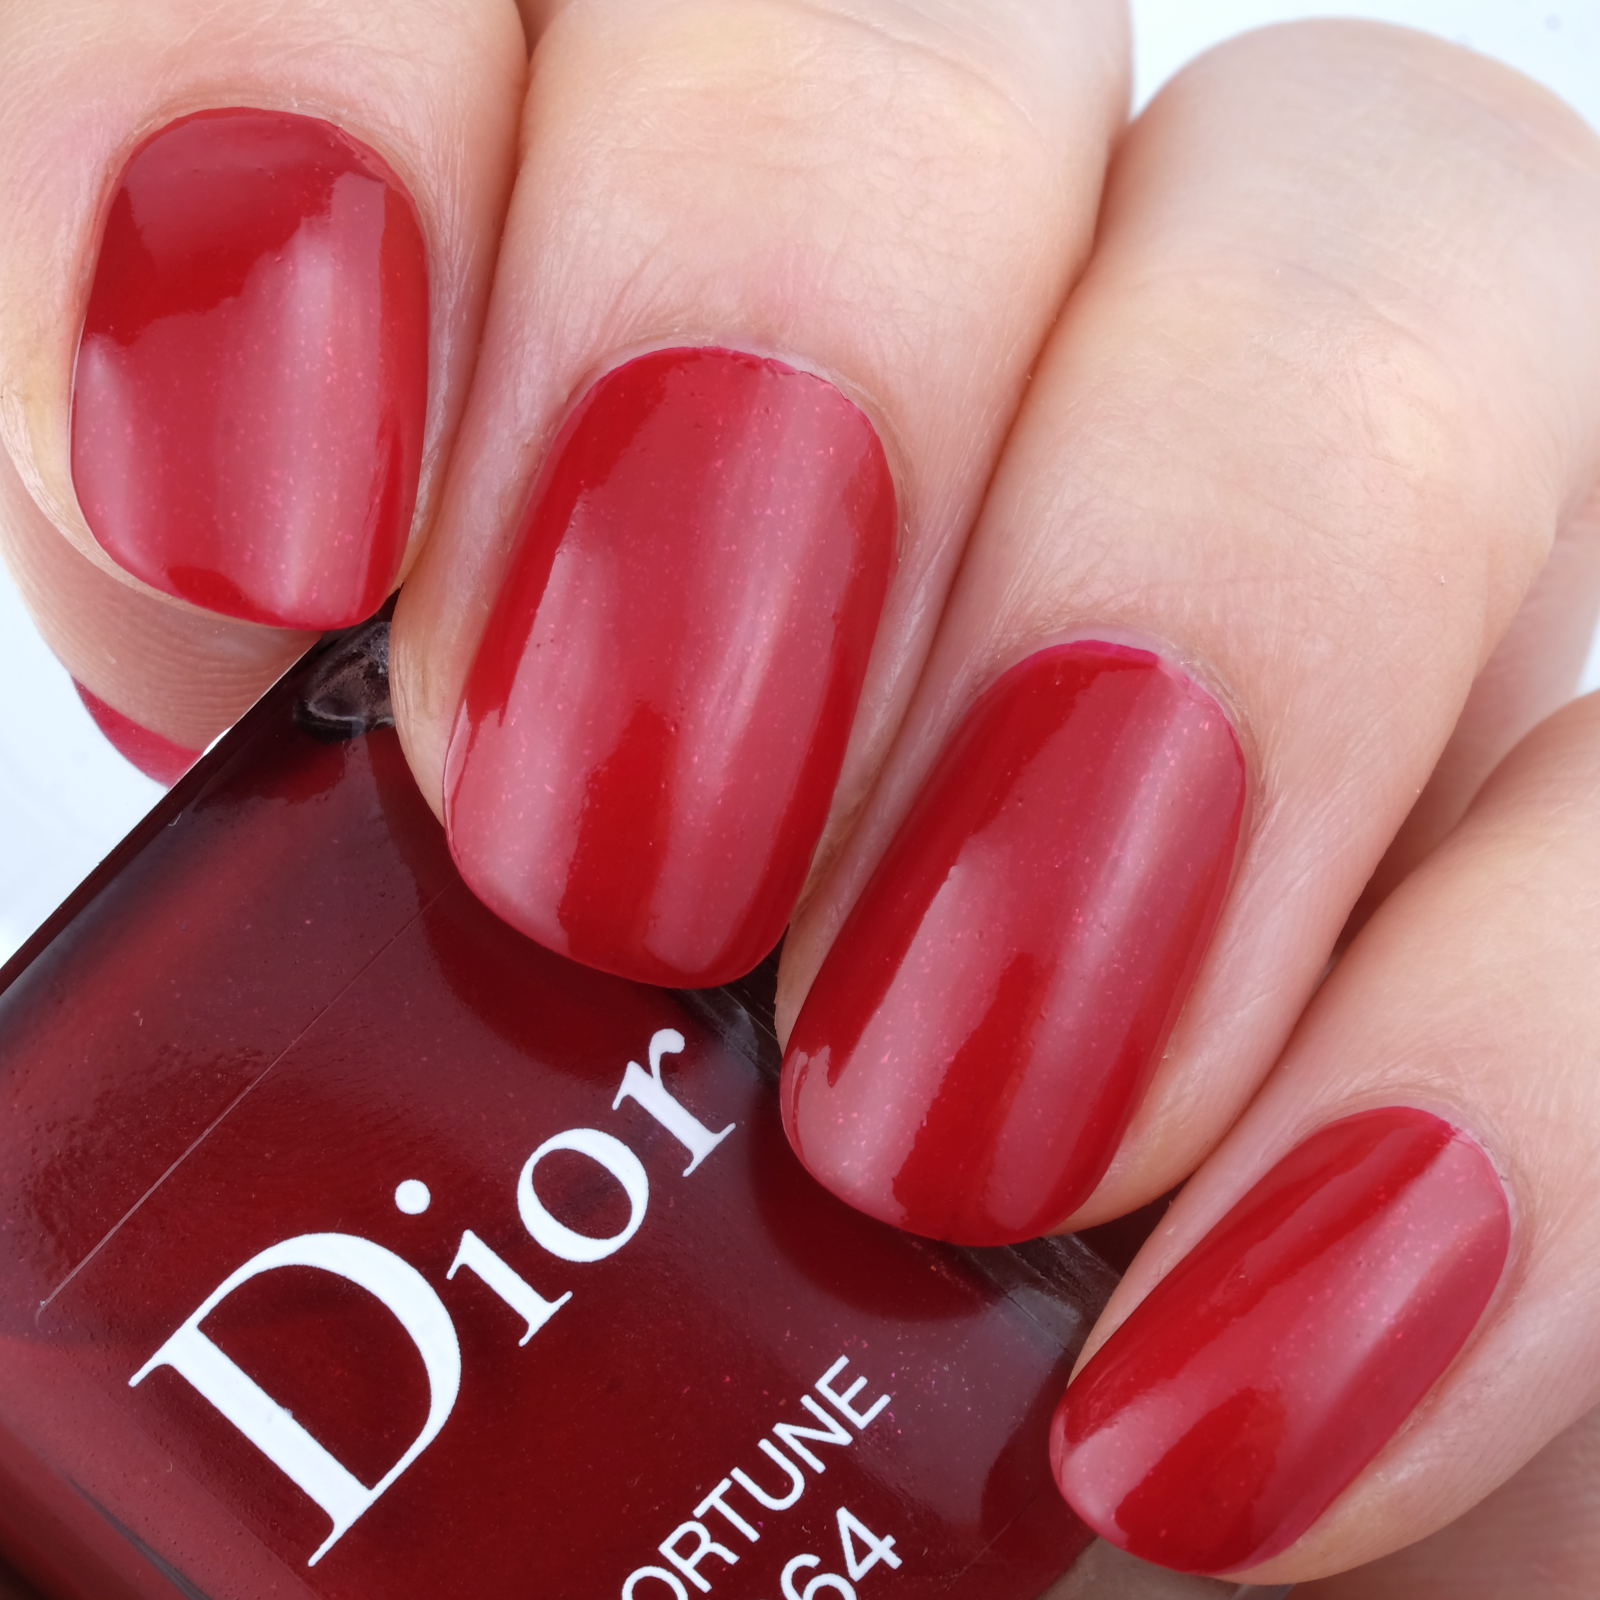 Dior | Holiday 2022 The Atelier of Dreams Collection | Dior Vernis: Review and Swatches